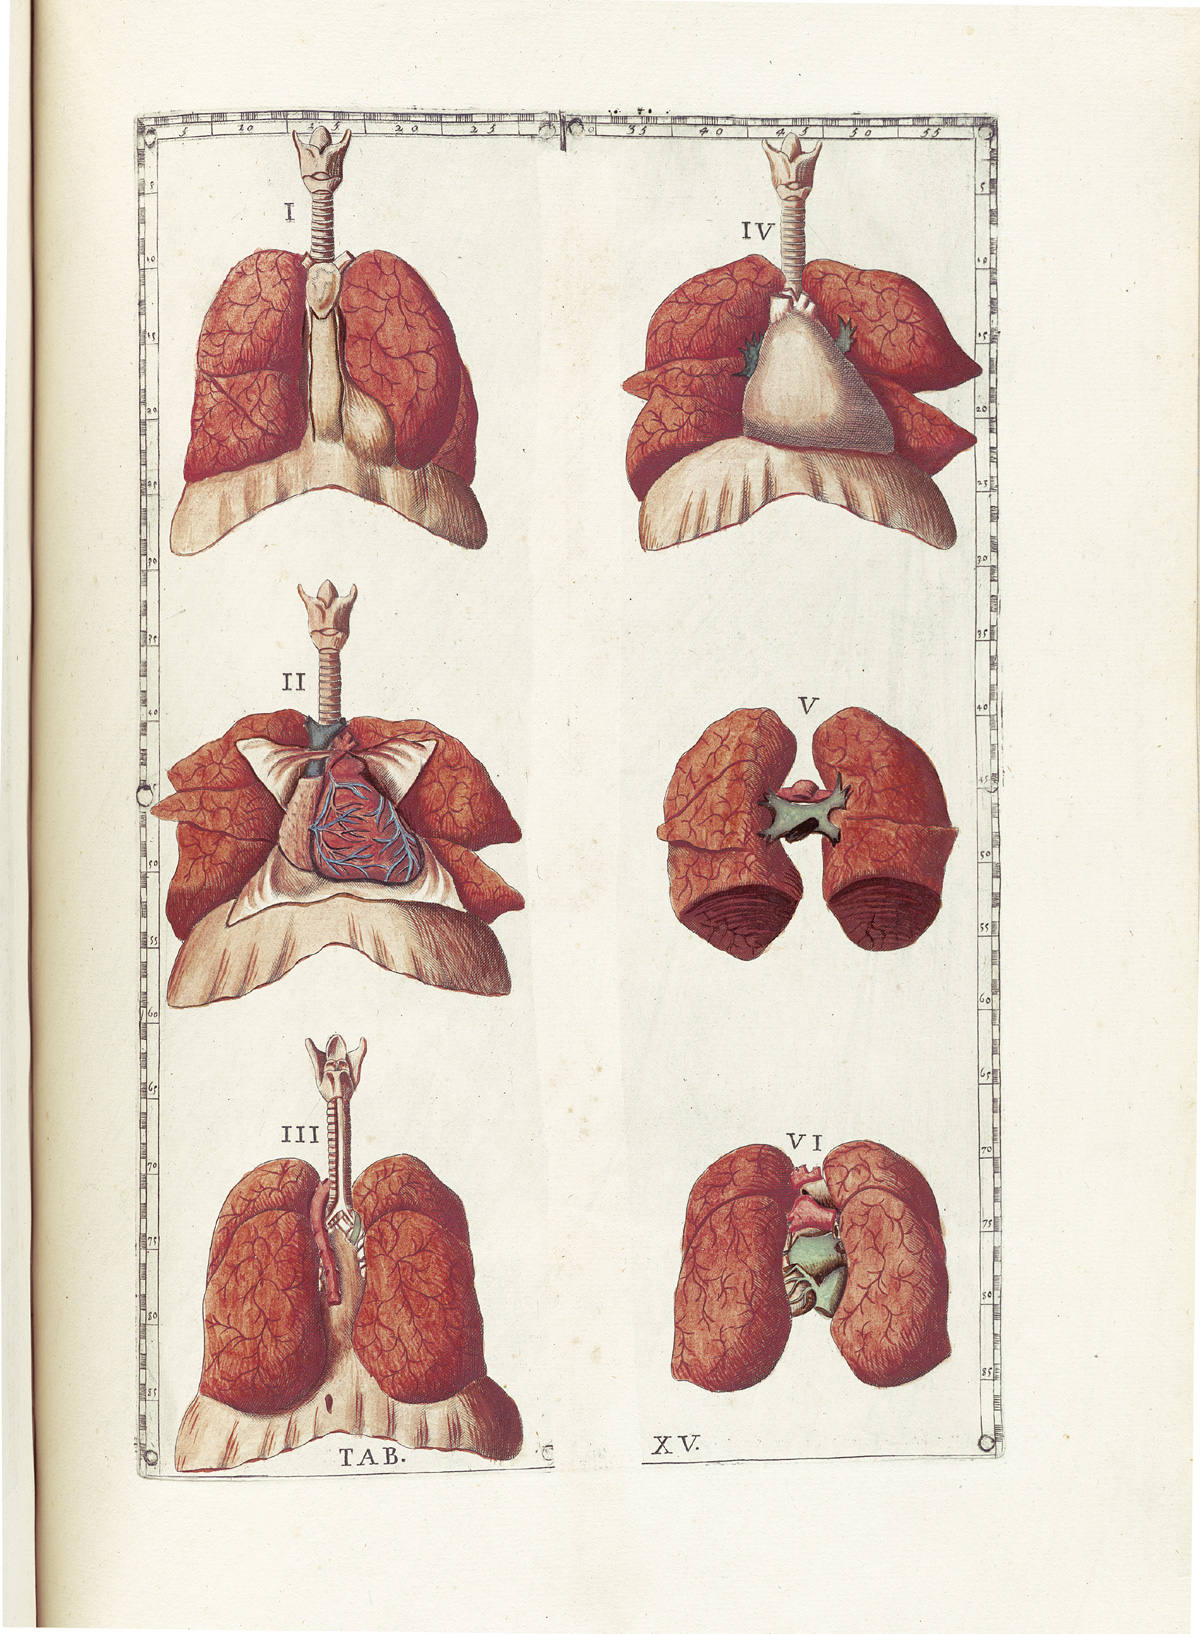 Hand-colored etching of six views of the respiratory system; on the left side from top to bottom are the entire system intact viewed from the front with larynx and trachea, longs, and diaphragm; the entire system with lungs pulled apart and pericardium opened to expose the heart; the entire system in tact viewed from behind; and on the right from top to bottom are entire system intact with longs pulled apart to expose the pericardium; the lungs viewed from the front alone with pulmonary arteries and veins attaching them; and the lungs viewed from behind attached by pulmonary arteries and veins; from Bartholomeo Eustachi’s Tabulae anatomicae, NLM Call no.: WZ 260 E87t 1783.